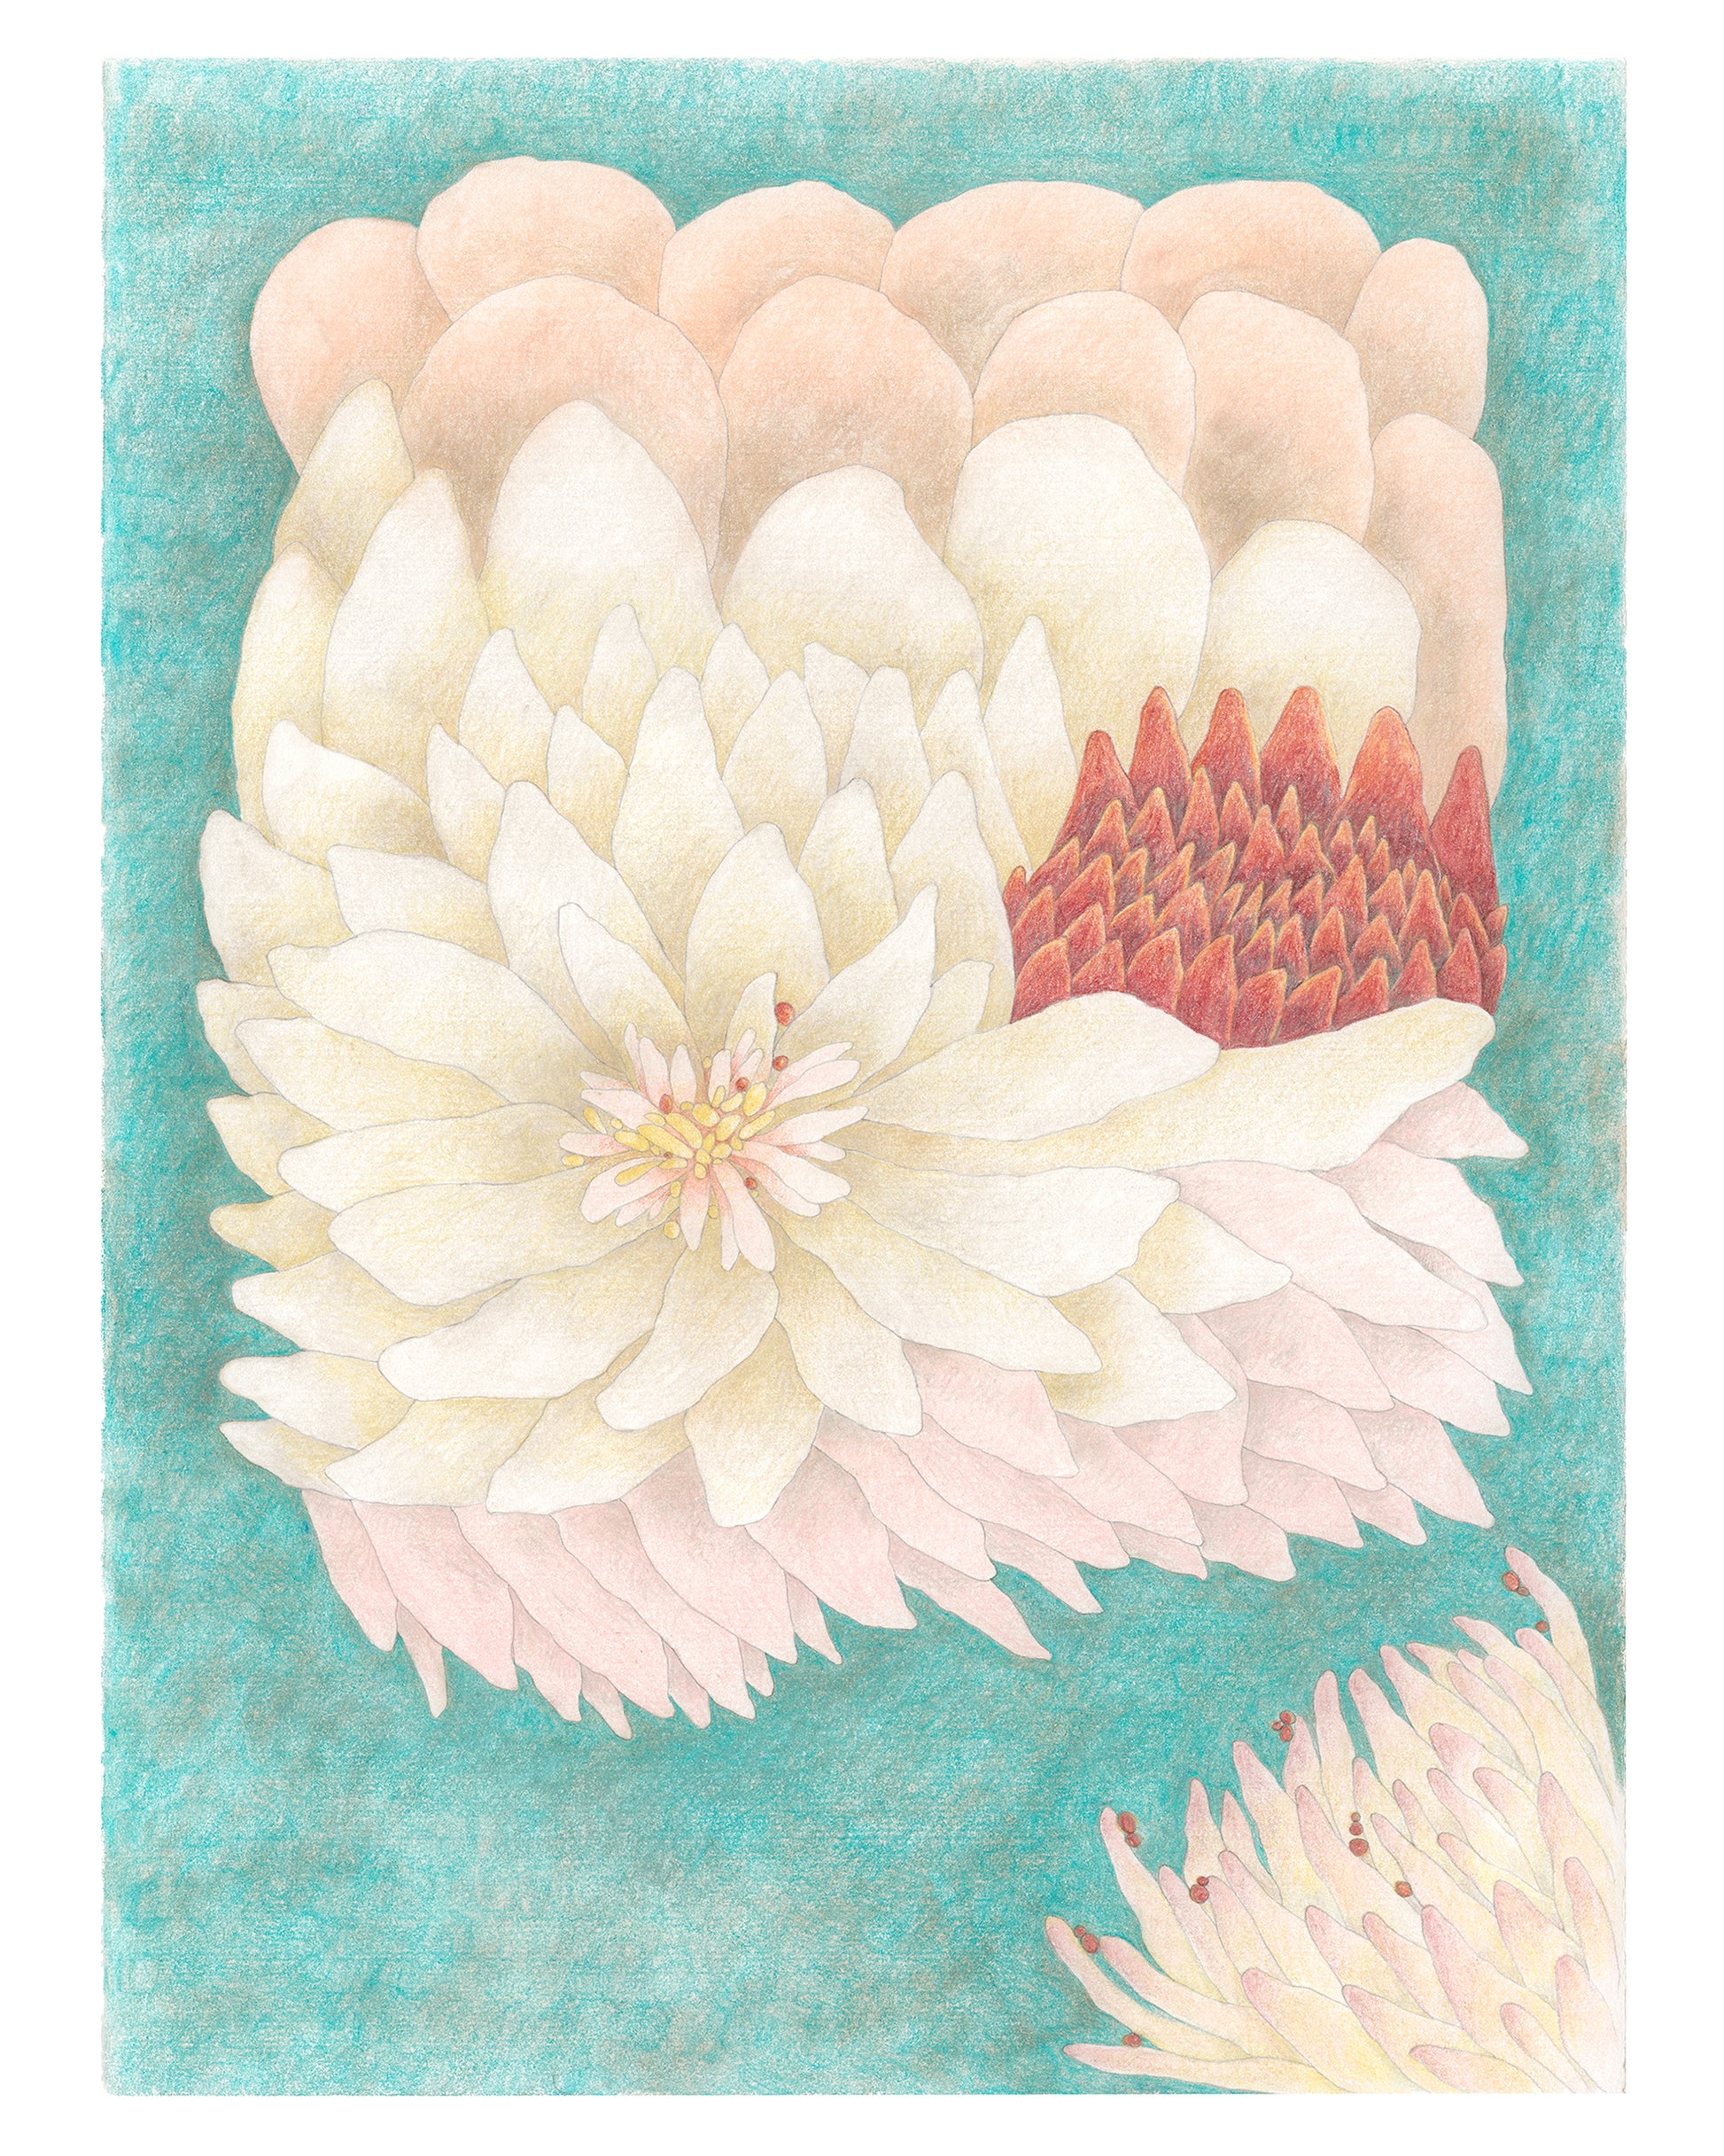 Surreal drawing of a large flower floating on a teal background.